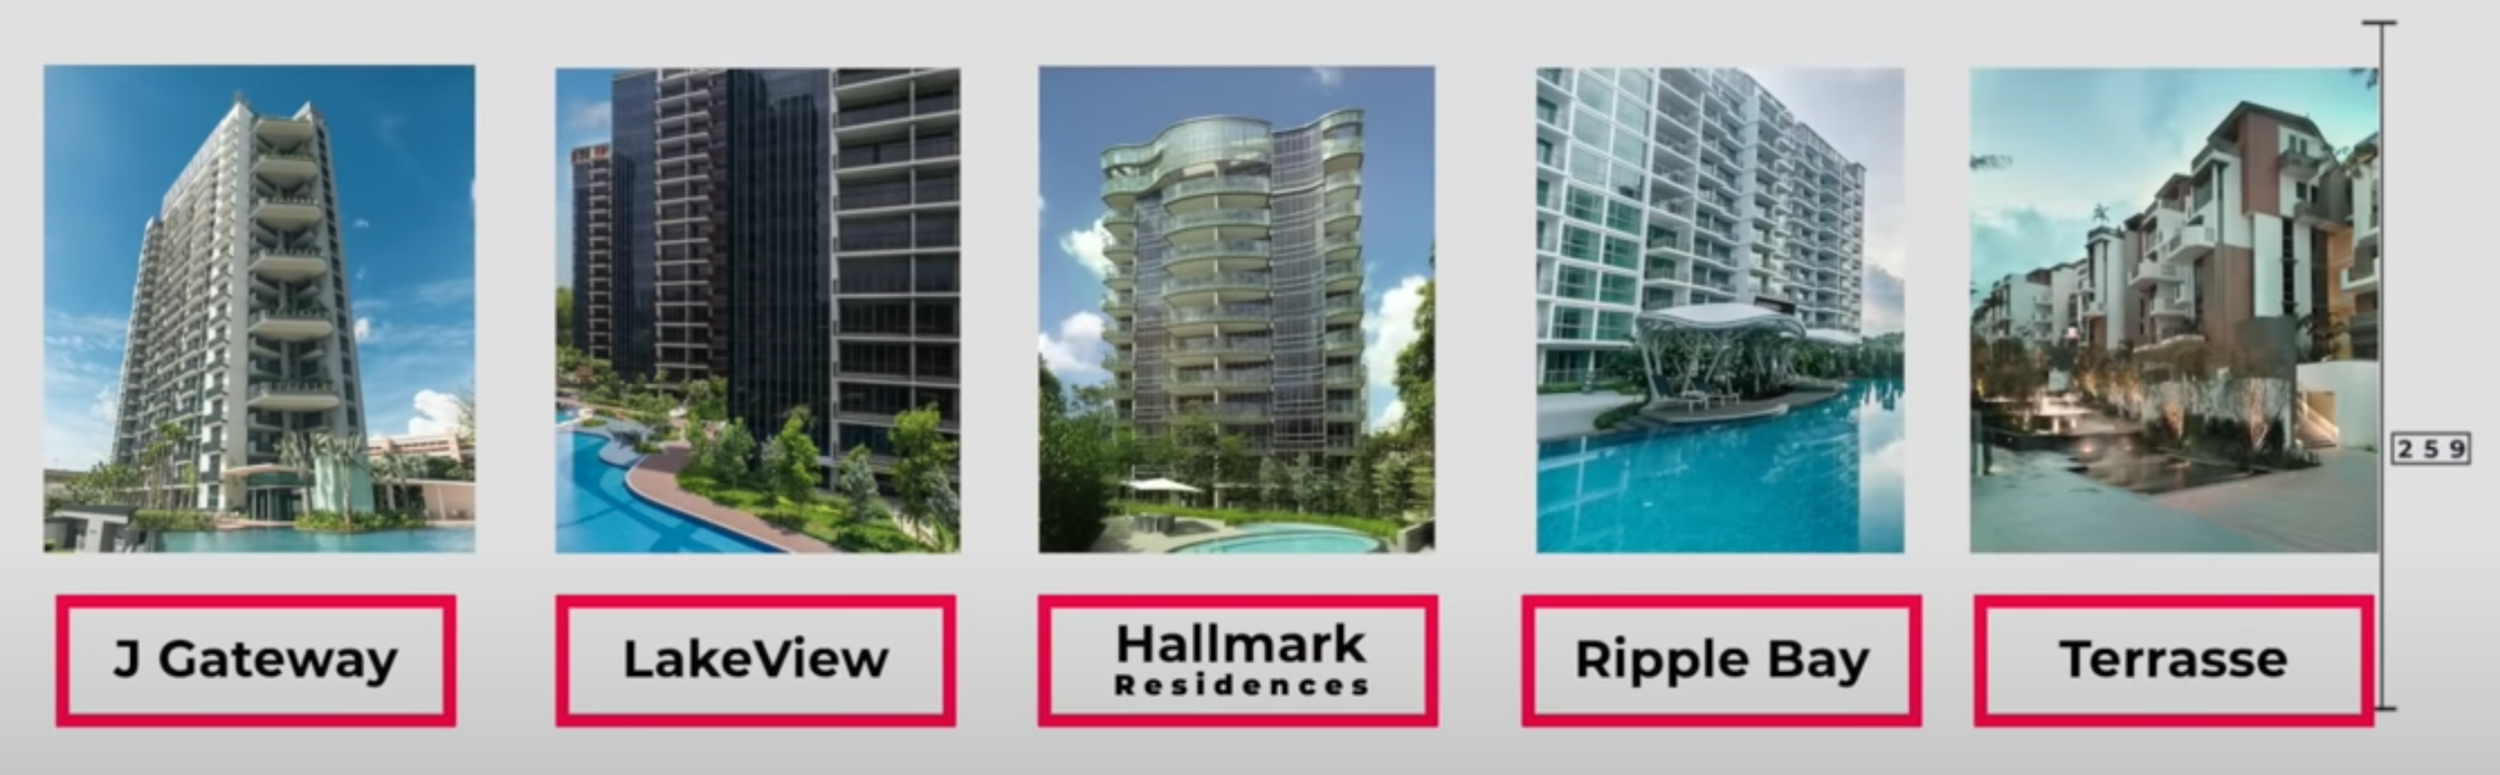 MCL Residences.png